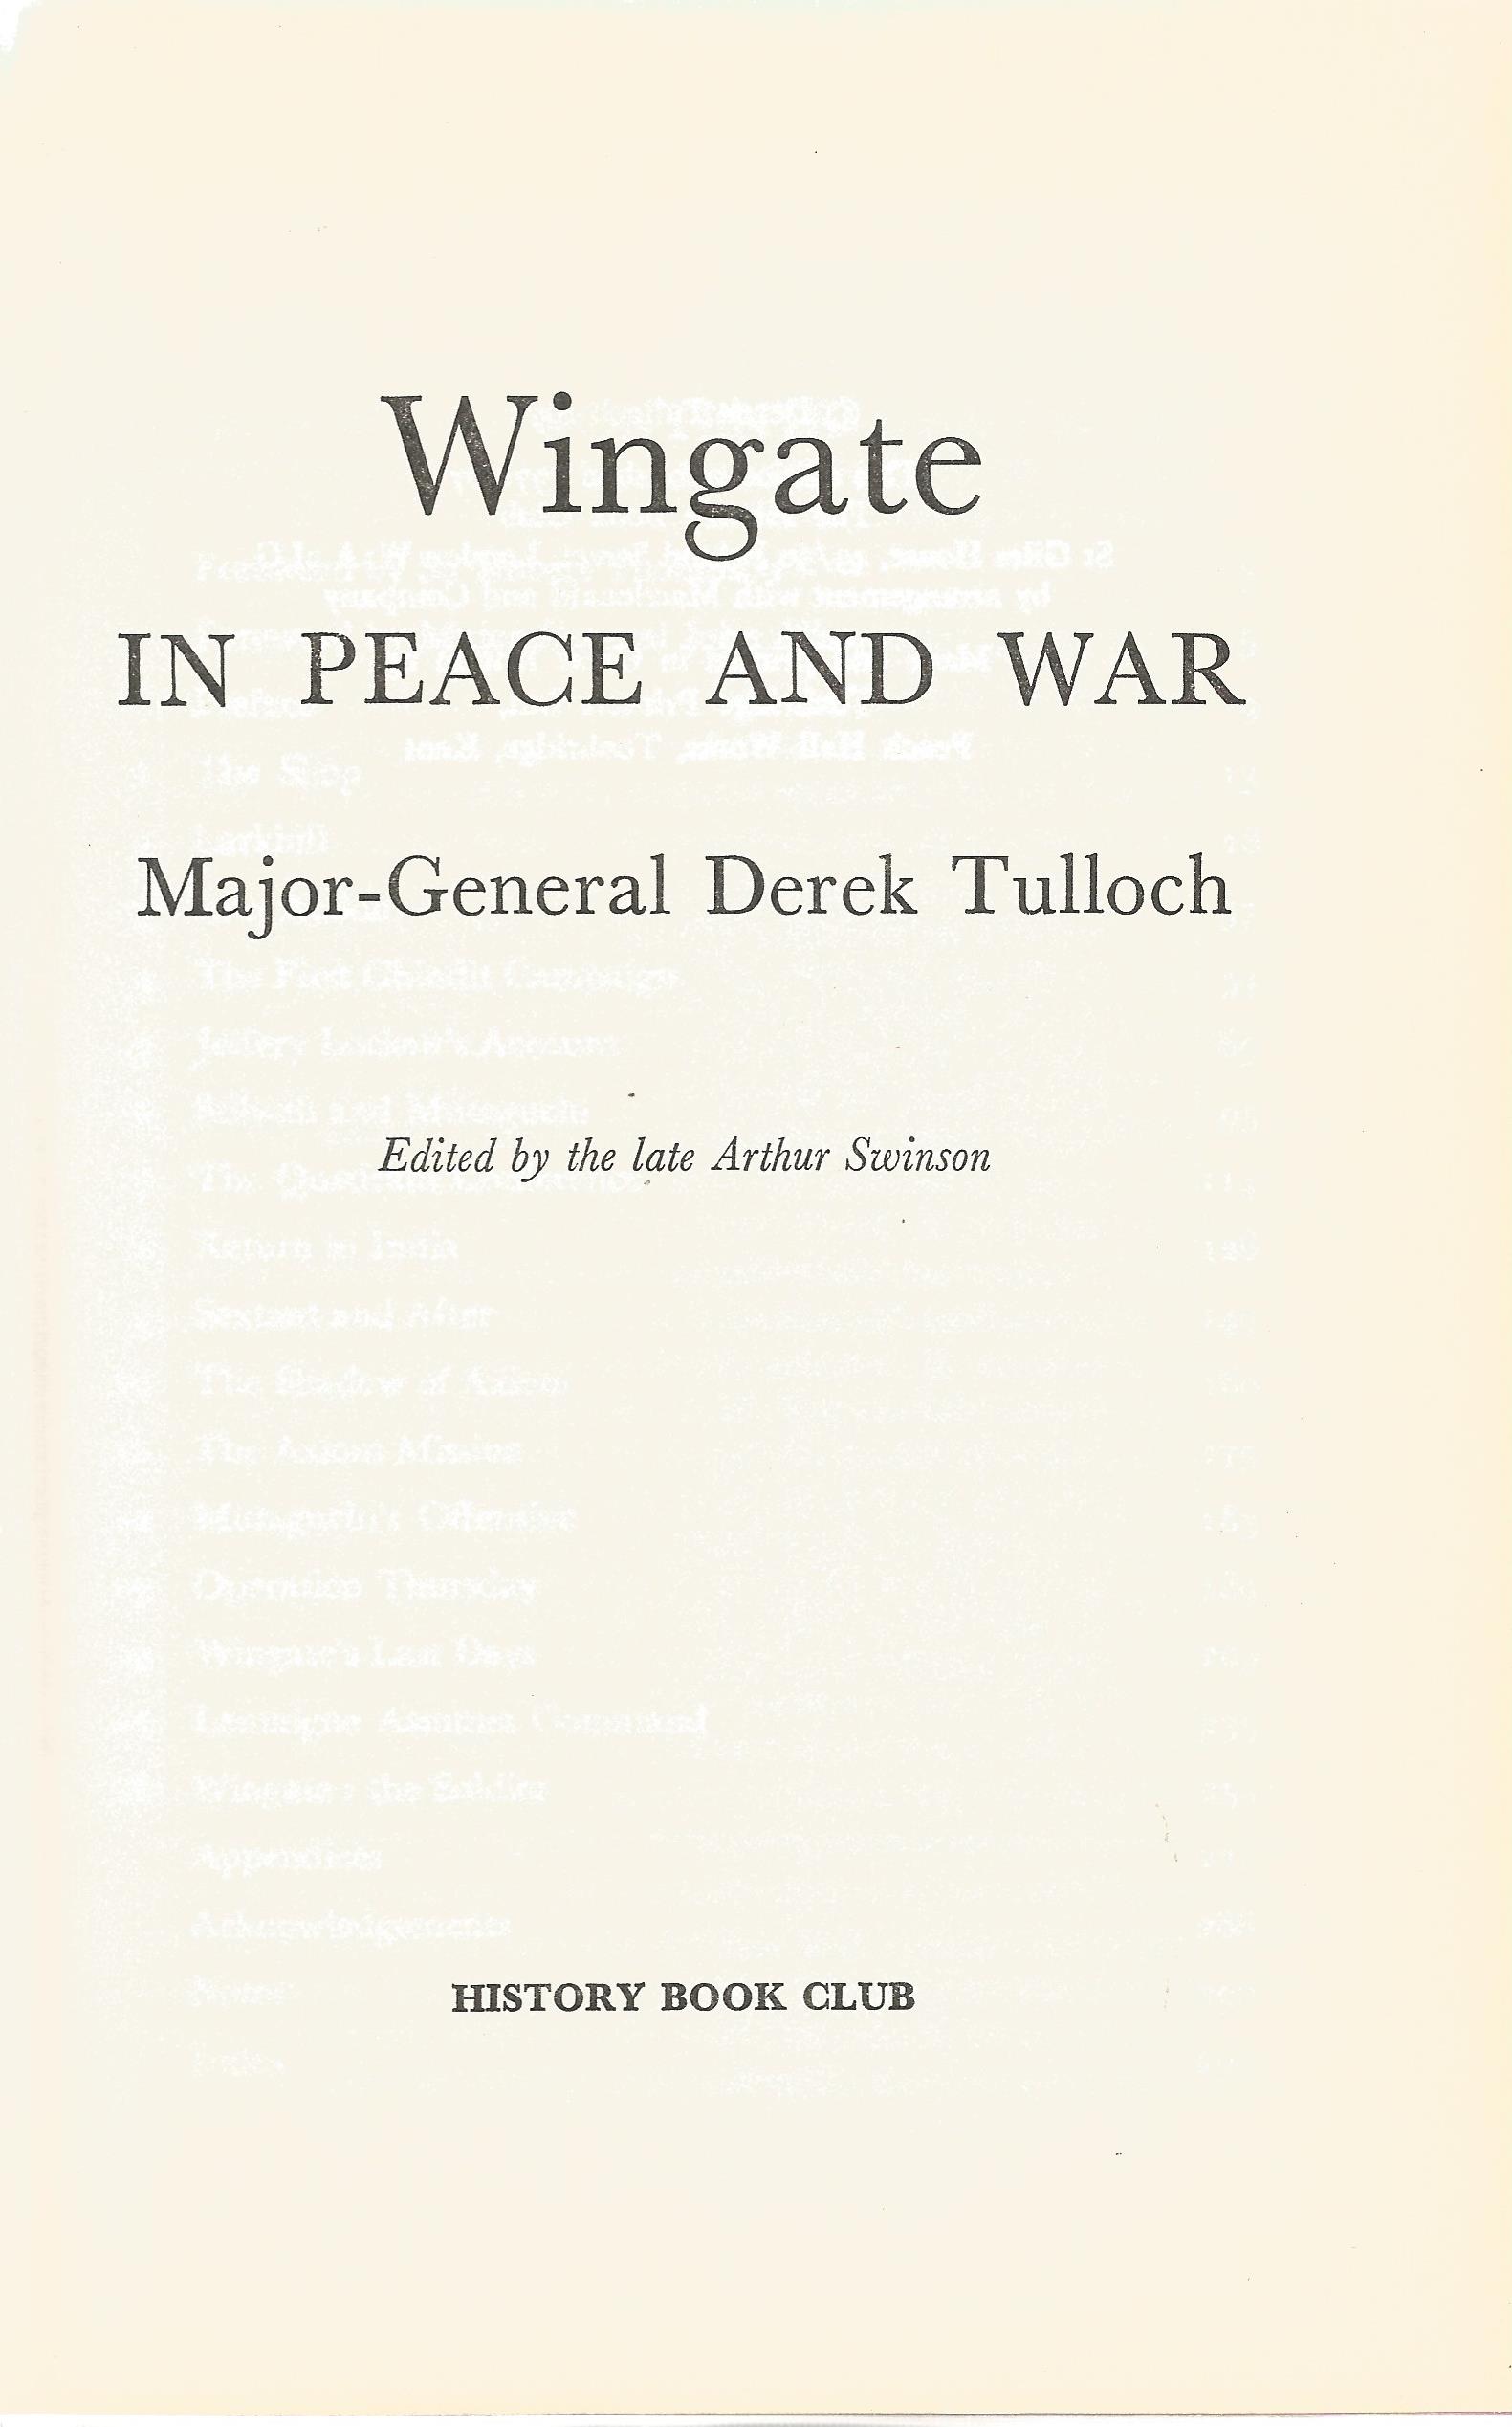 Major-General Derek Tulloch hardback book Wingate in Peace and War 1972 First Edition published by - Image 2 of 2